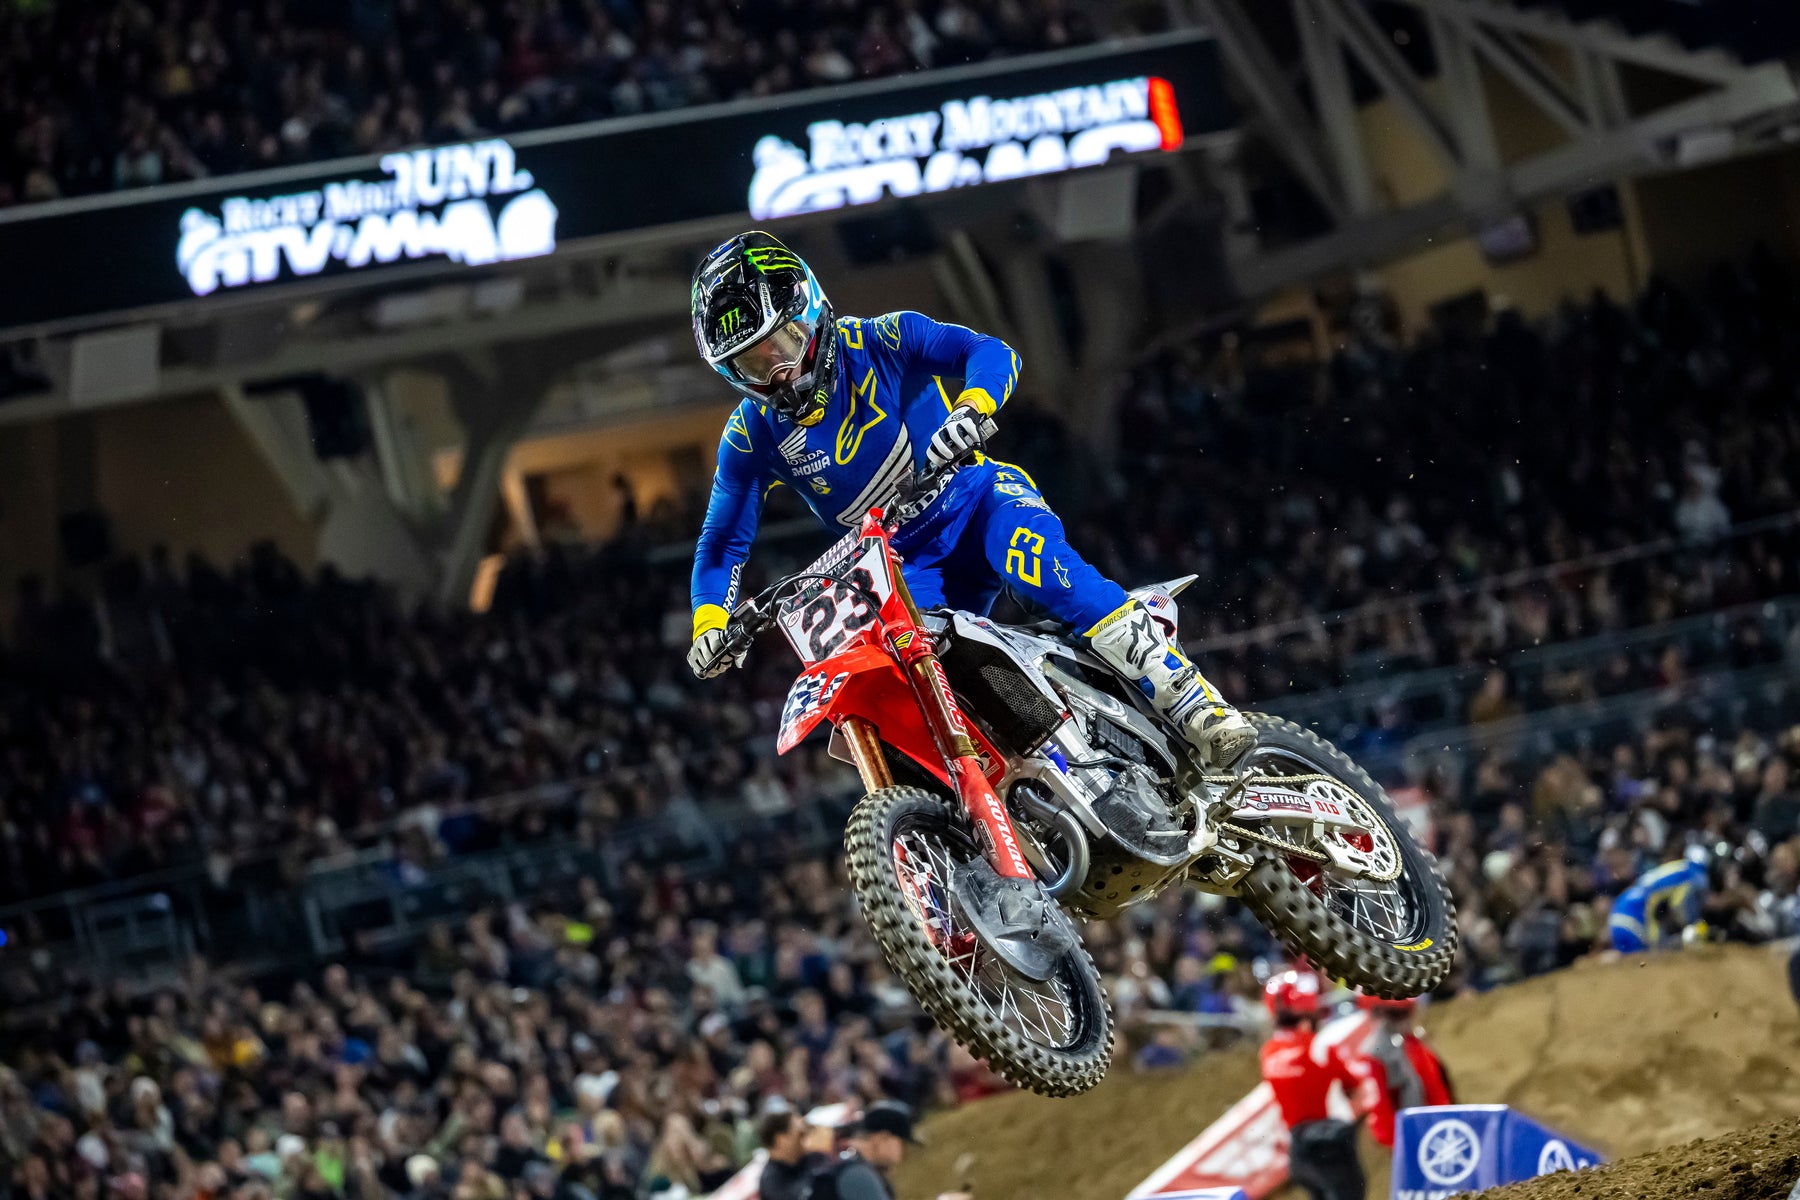 CHASE SEXTON STORMS TO 450SX VICTORY AS ALPINESTARS LOCKS OUT THE PODIUM AT SAN DIEGO, CALIFORNIA